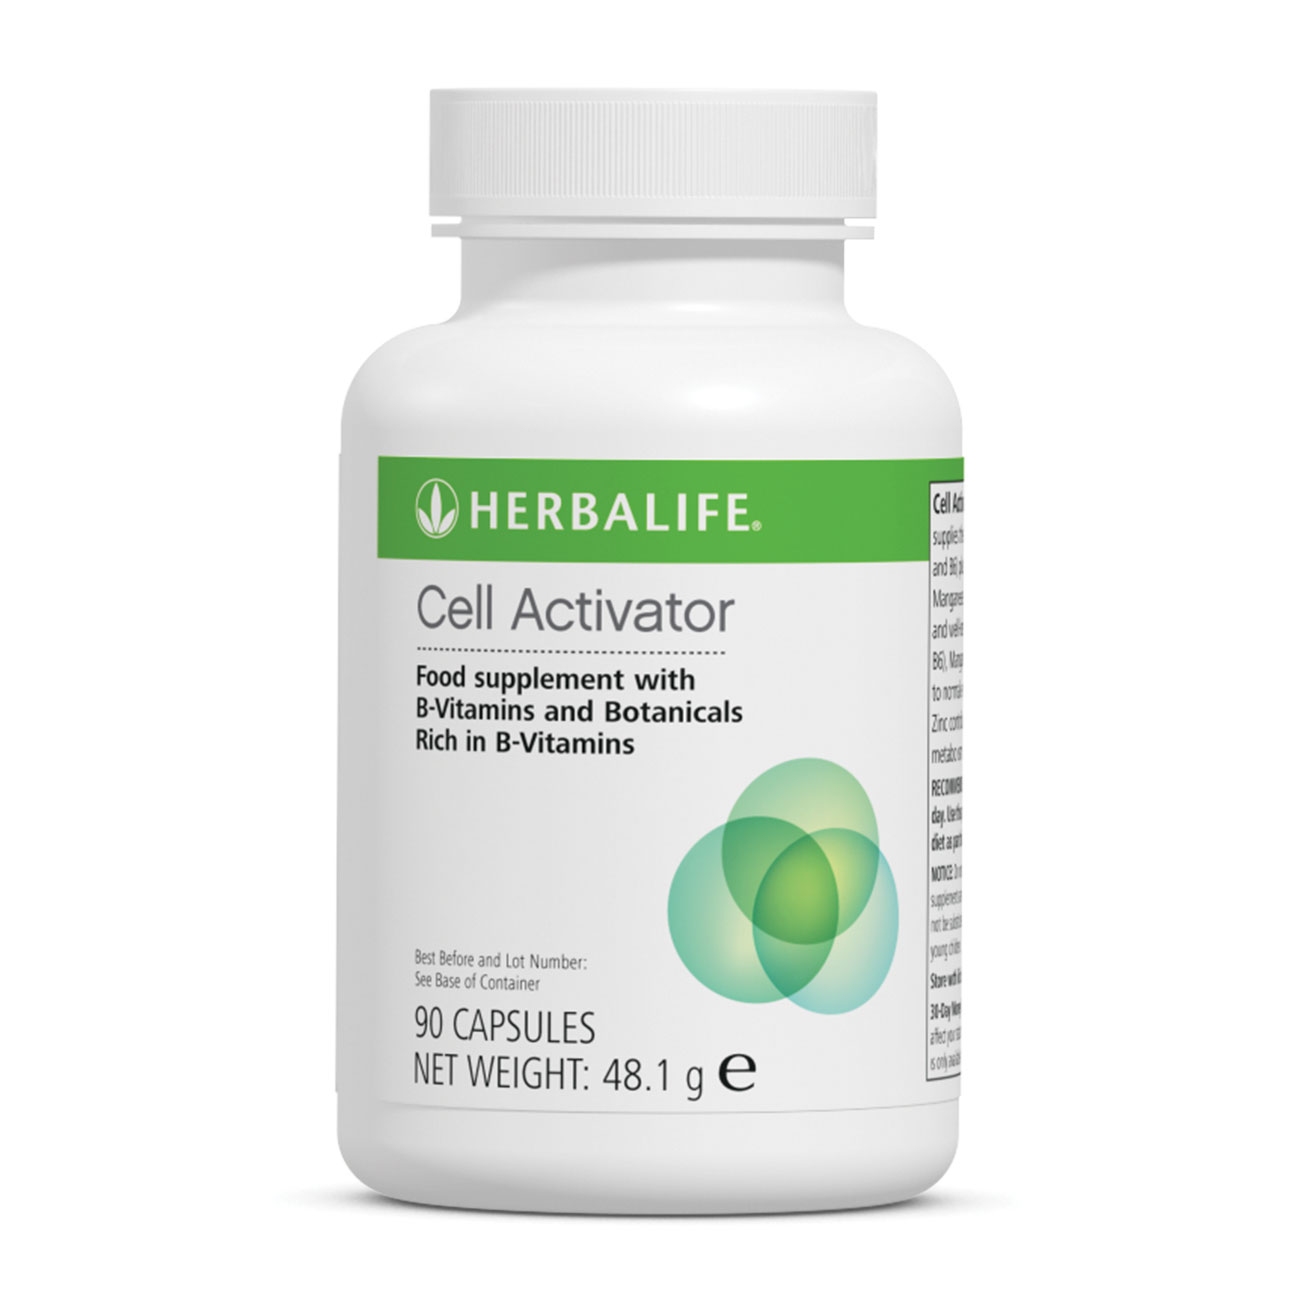 Cell Activator Food Supplement product shot